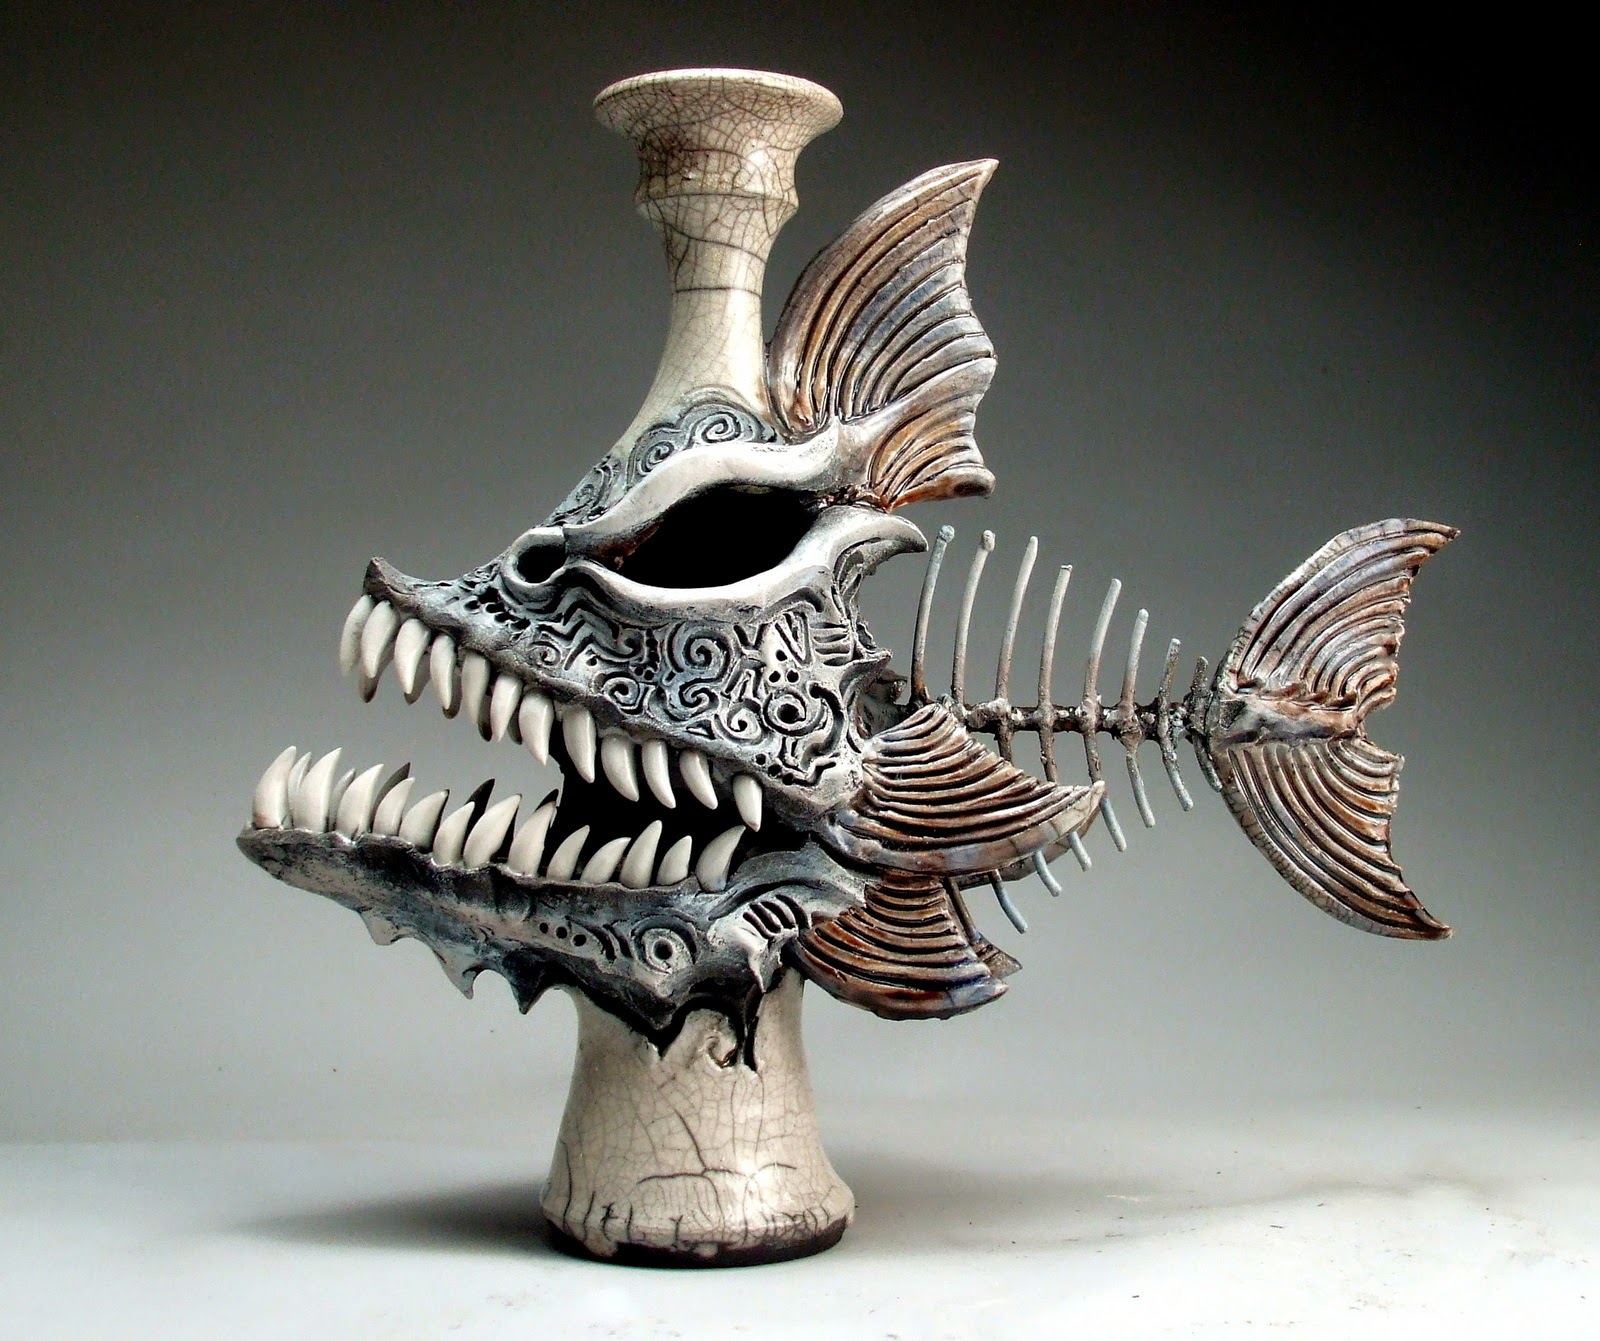 ceramic sculpture fish scales jug by mitchell grafton